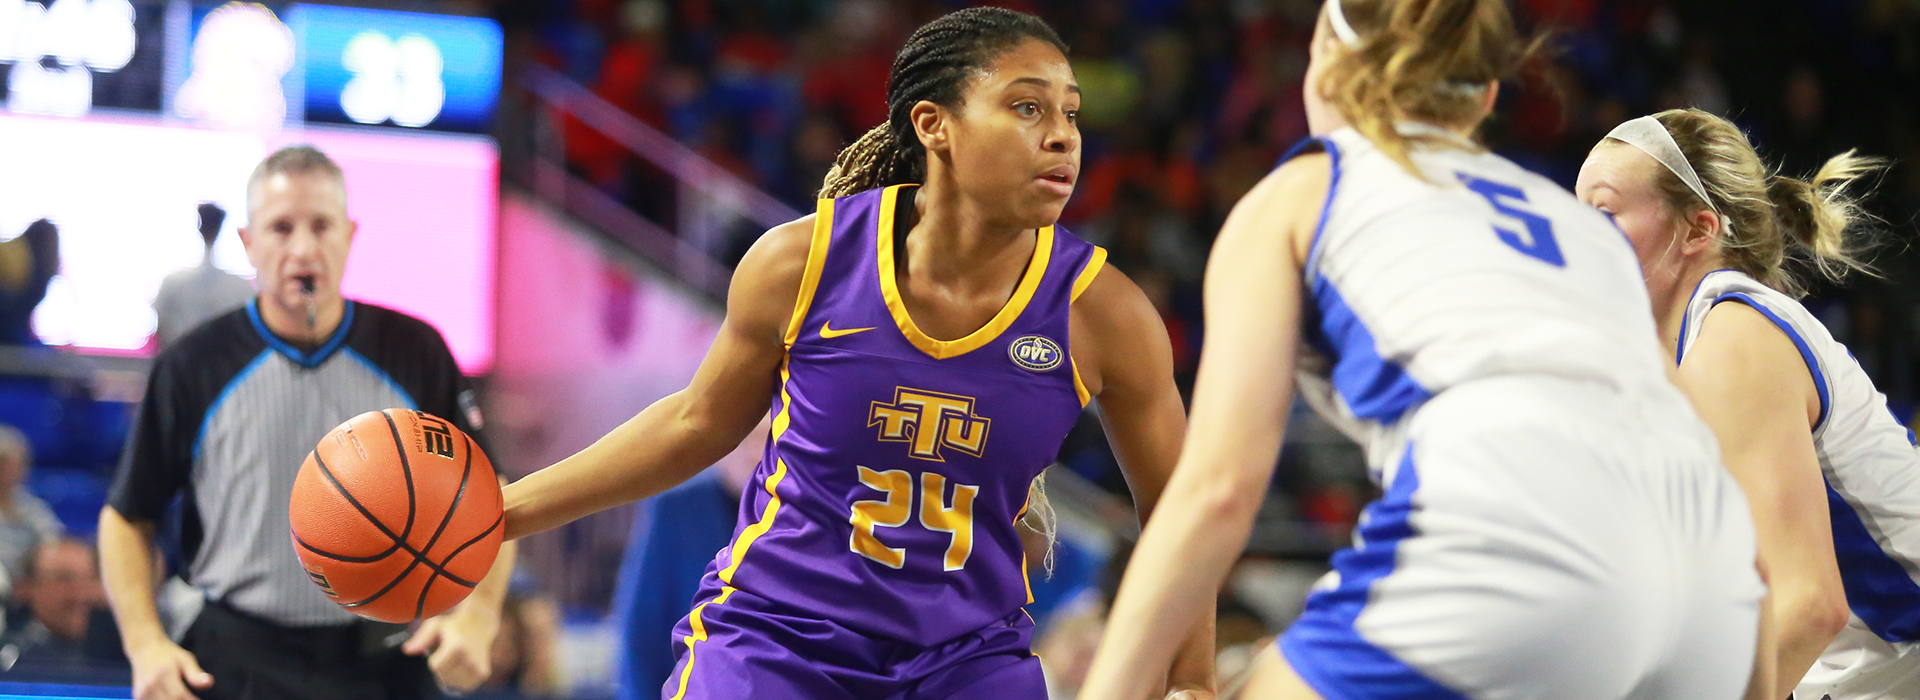 Tech women return to action at home Saturday vs. Alabama A&M